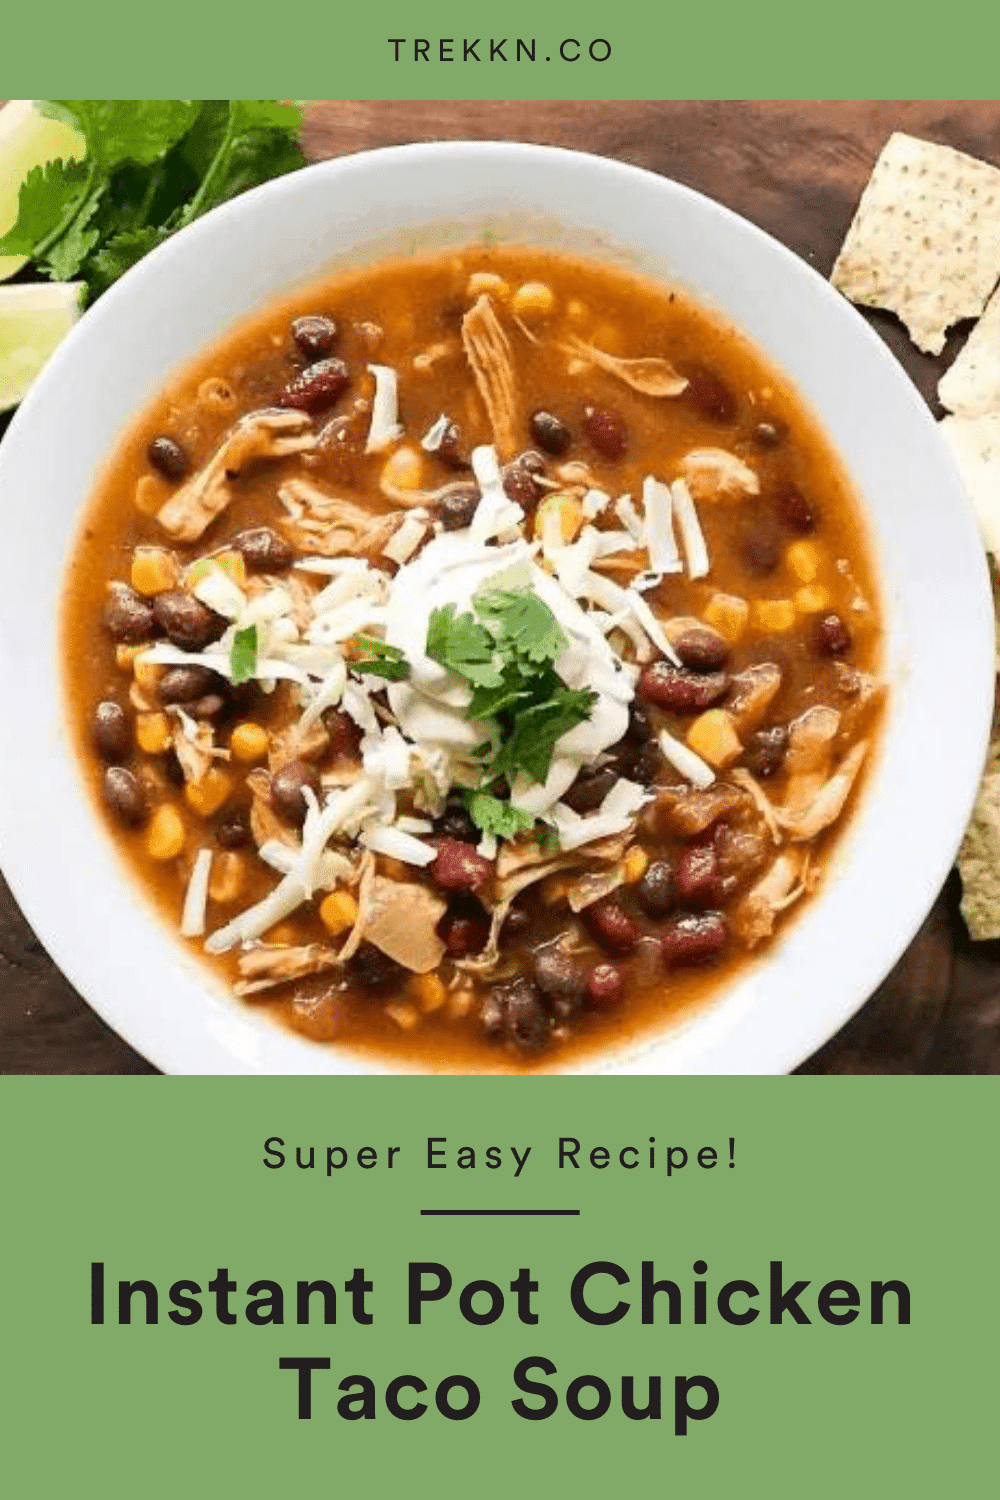 Instant Pot Chicken Taco Soup: A Delicious Soup to Make In Your RV